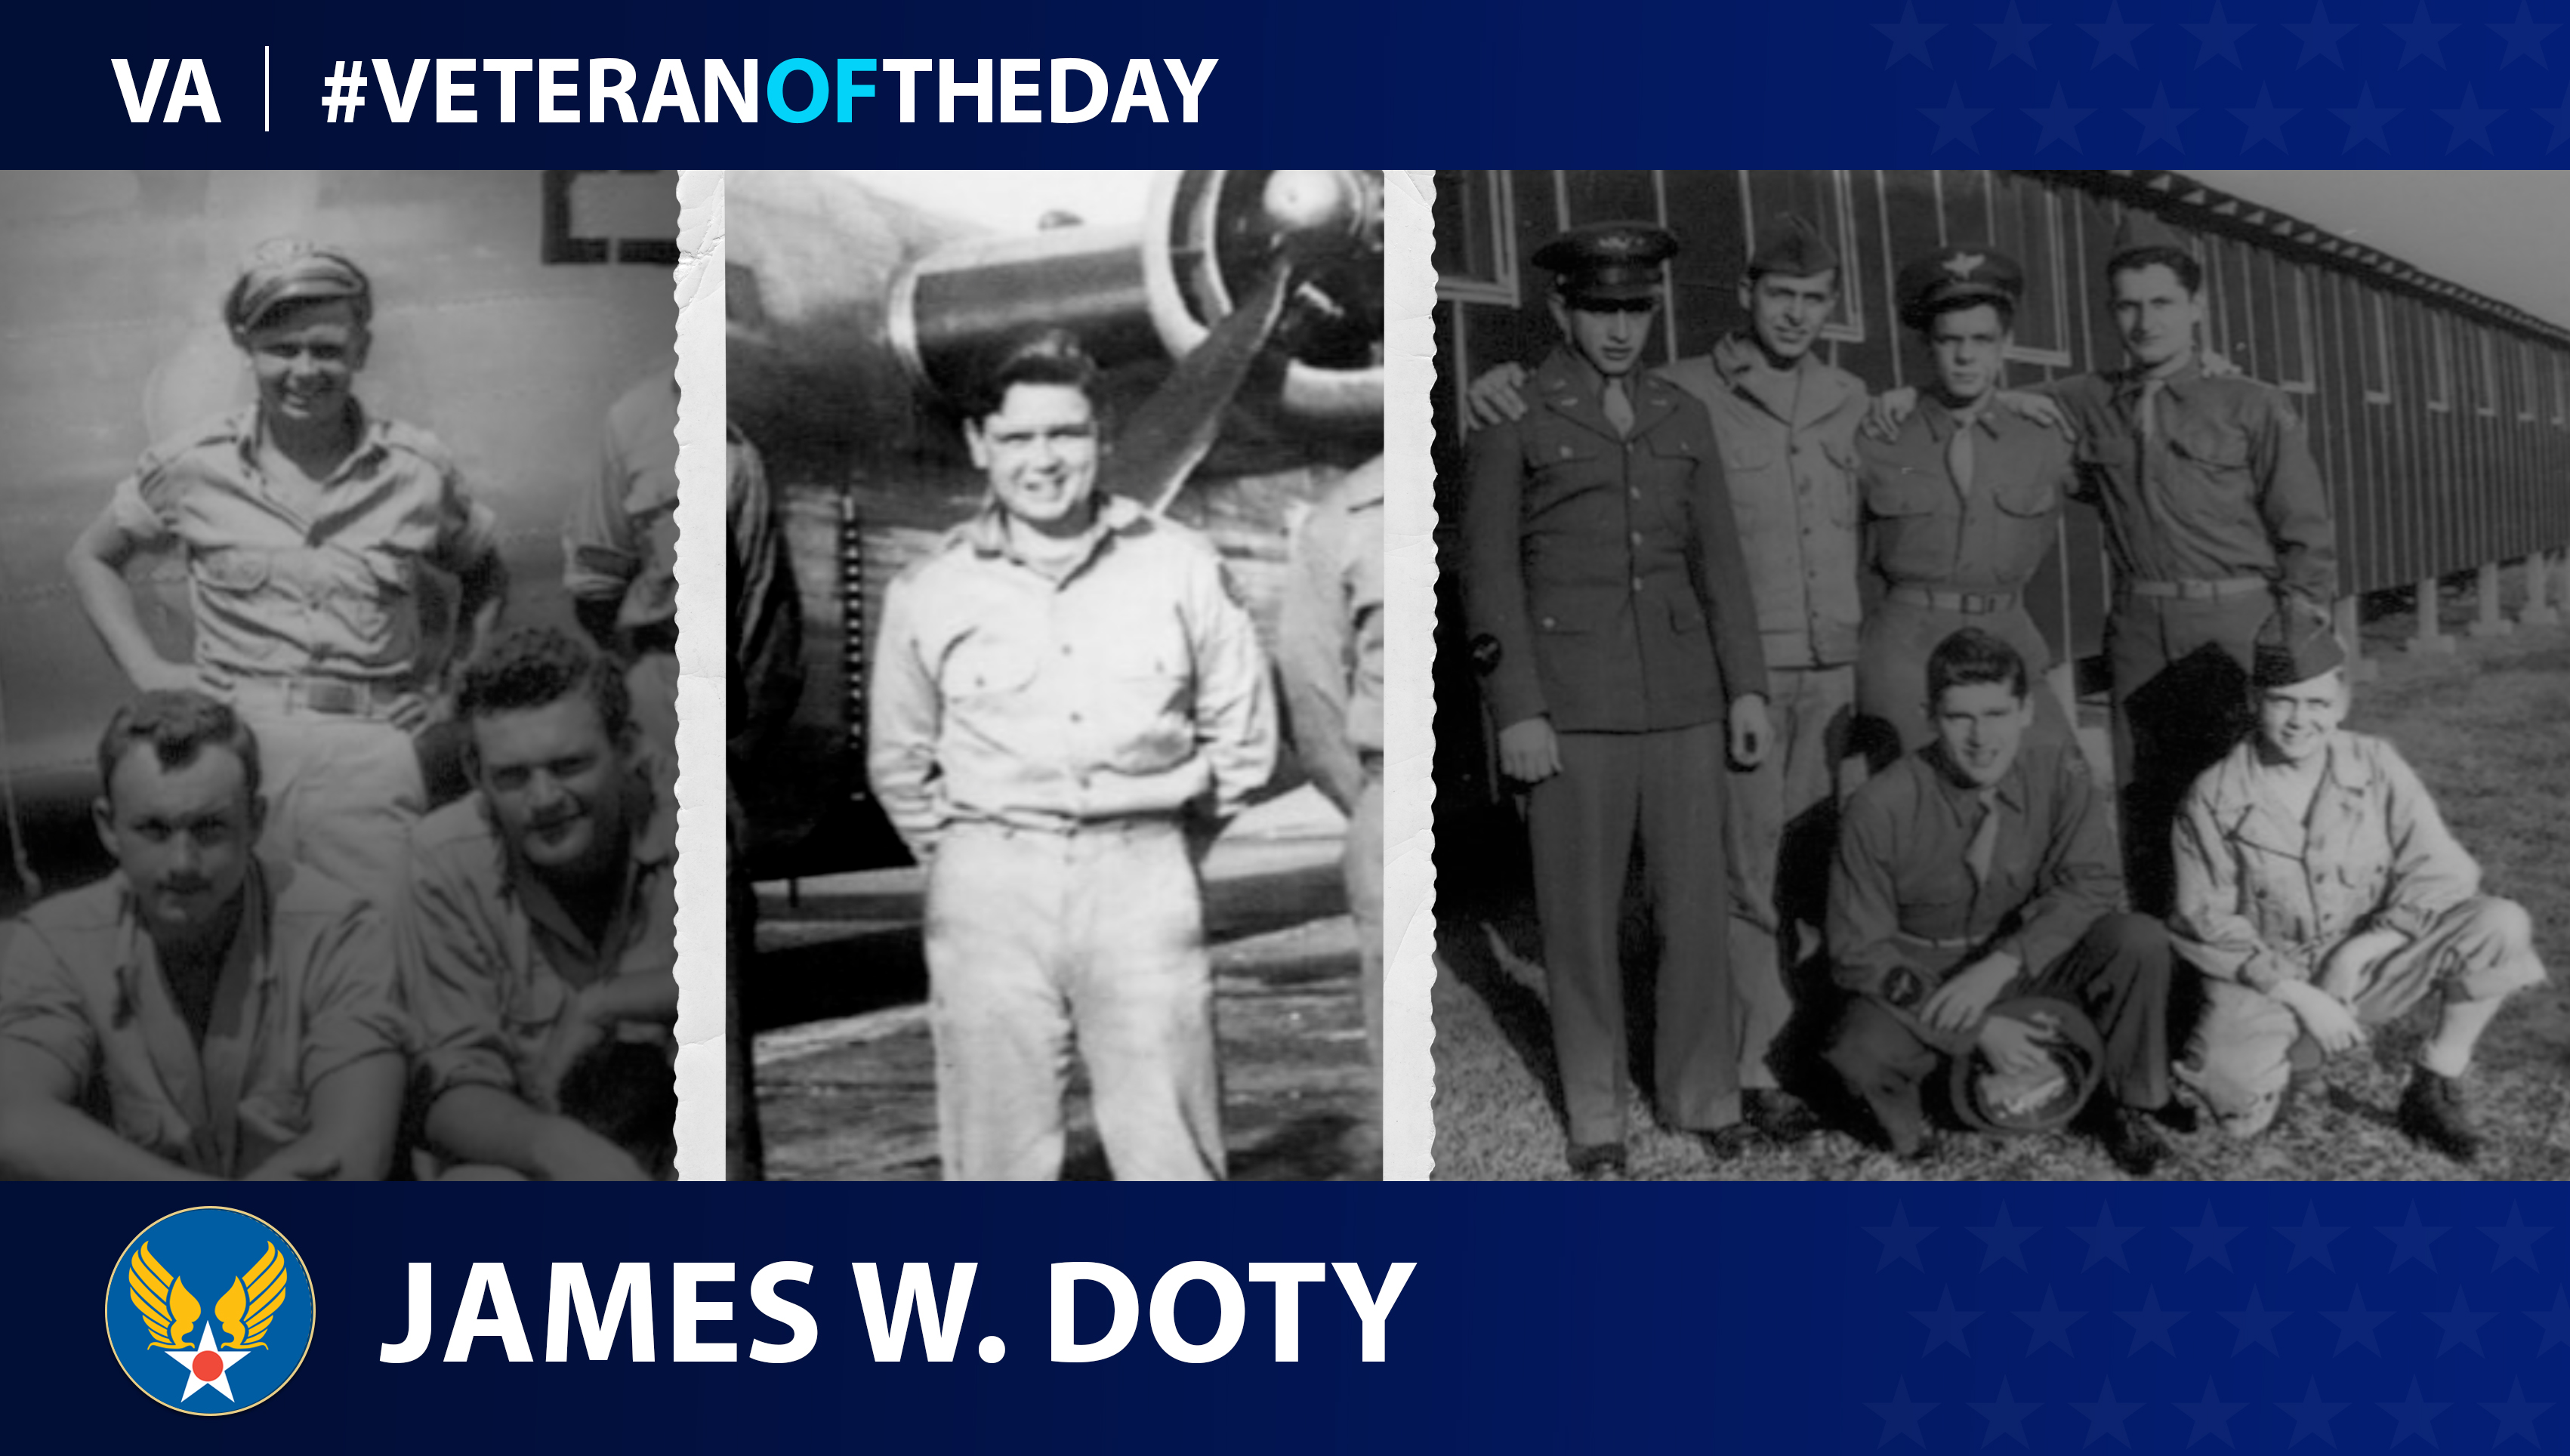 Army Air Forces Veteran James Willard Doty is today's Veteran of the day.